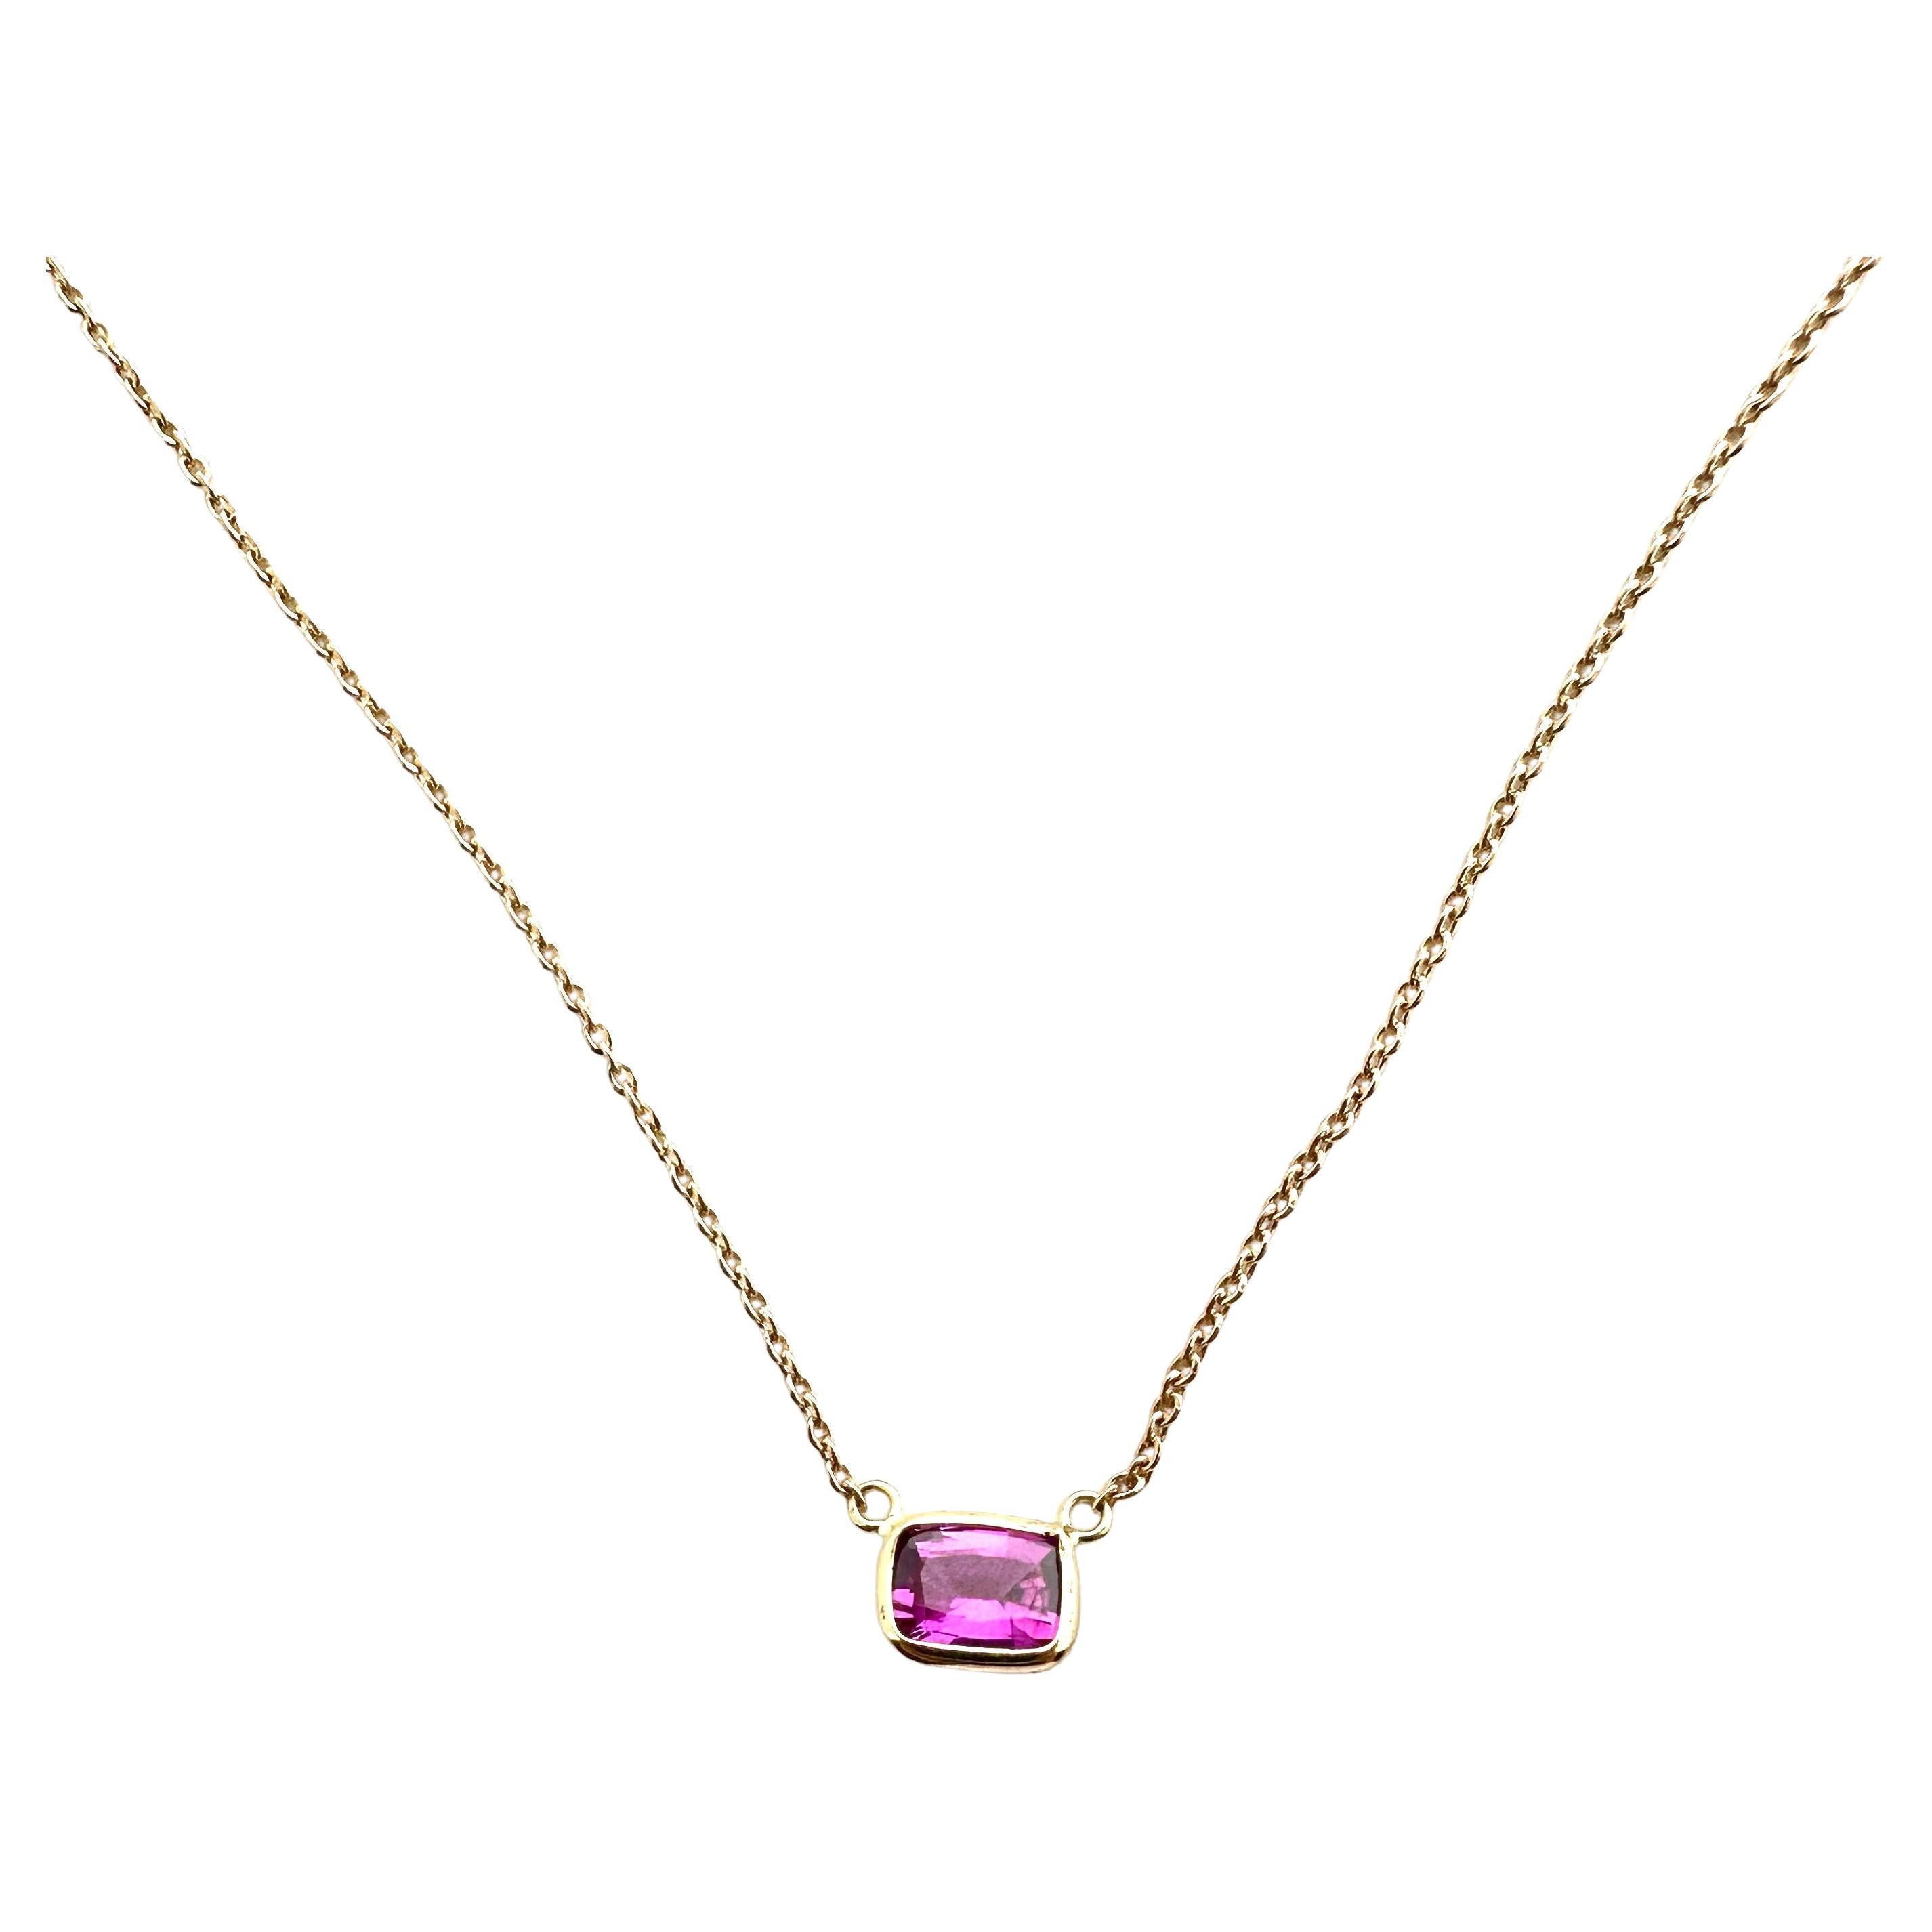 1.21ct. Certified Pink Sapphire Cushion Cut Solitaire Necklace in 14k RG For Sale